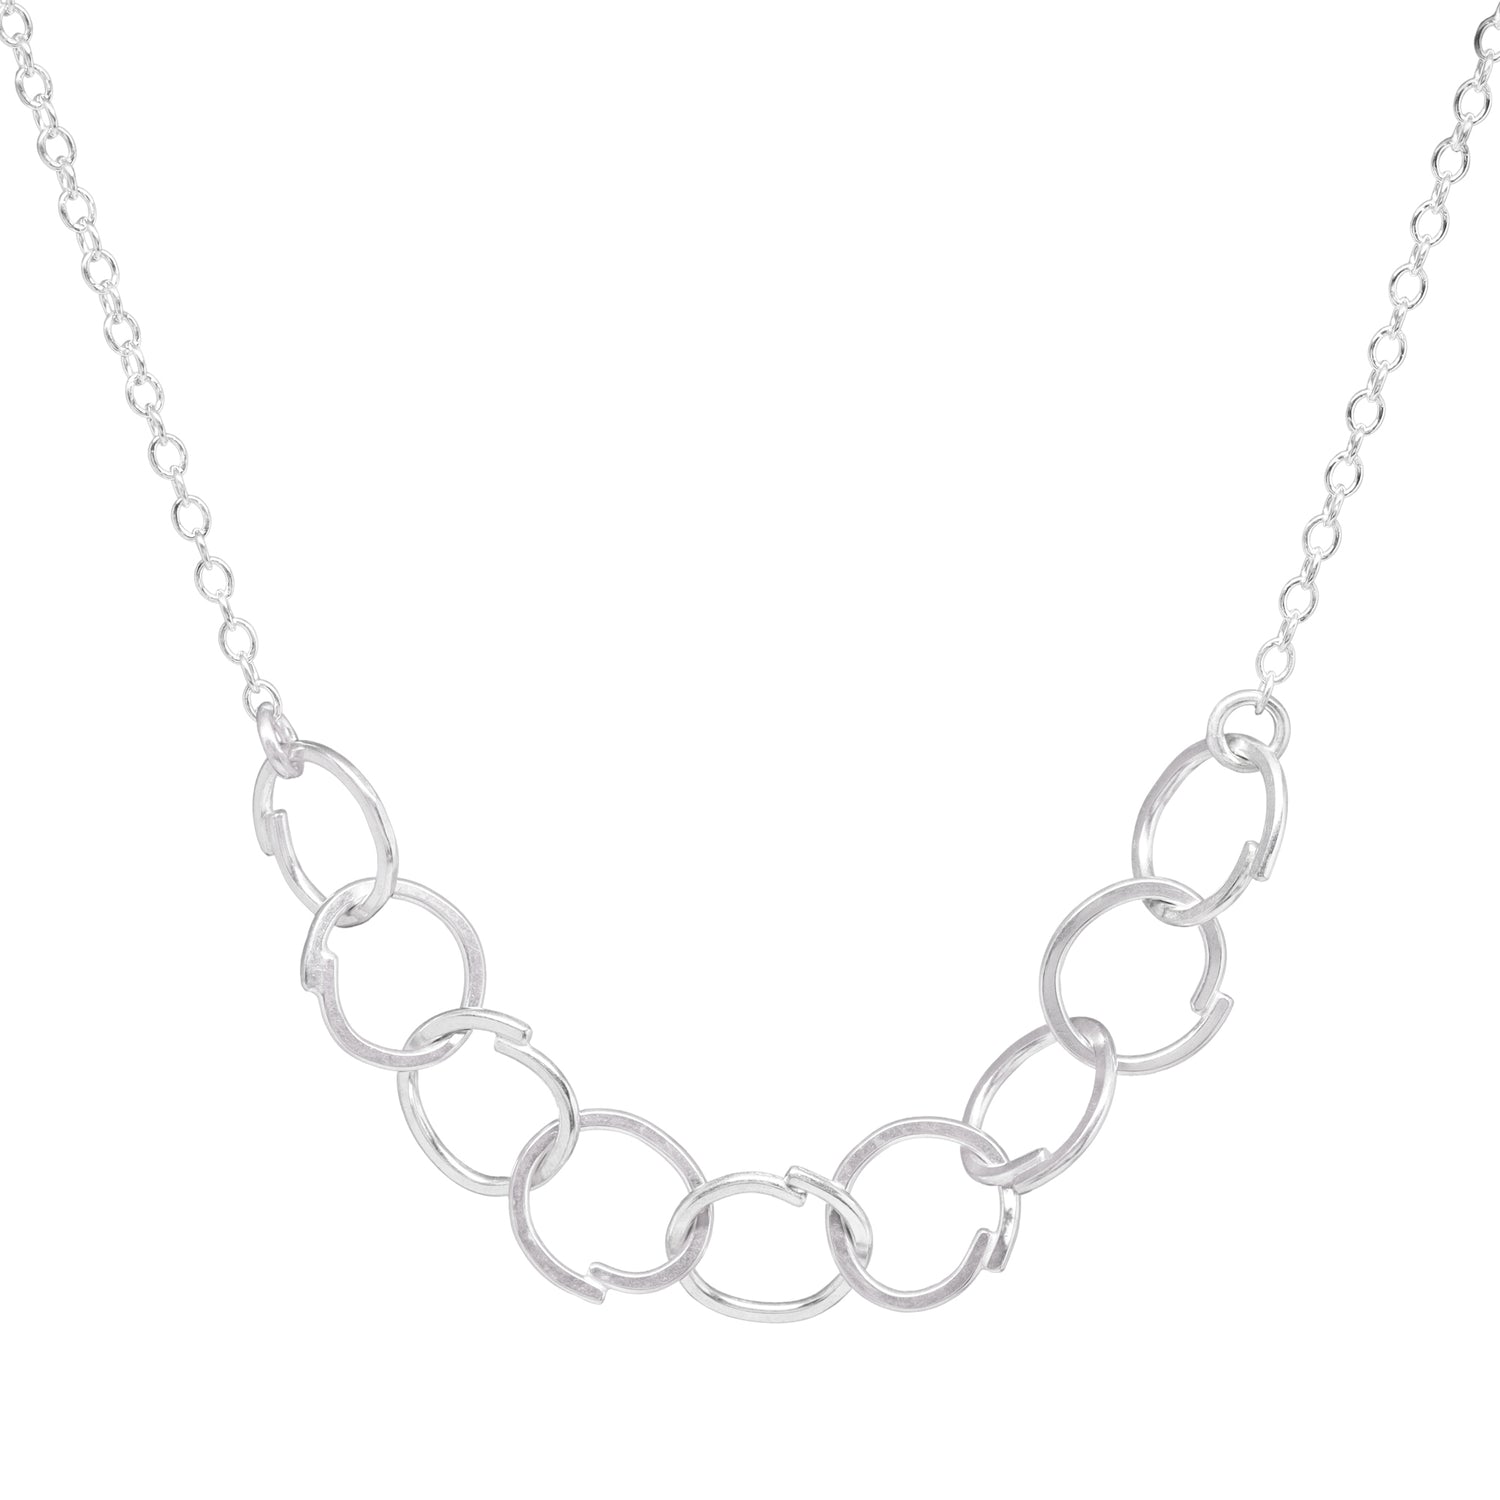 Sketch Mini Links Necklace - Bright Sterling